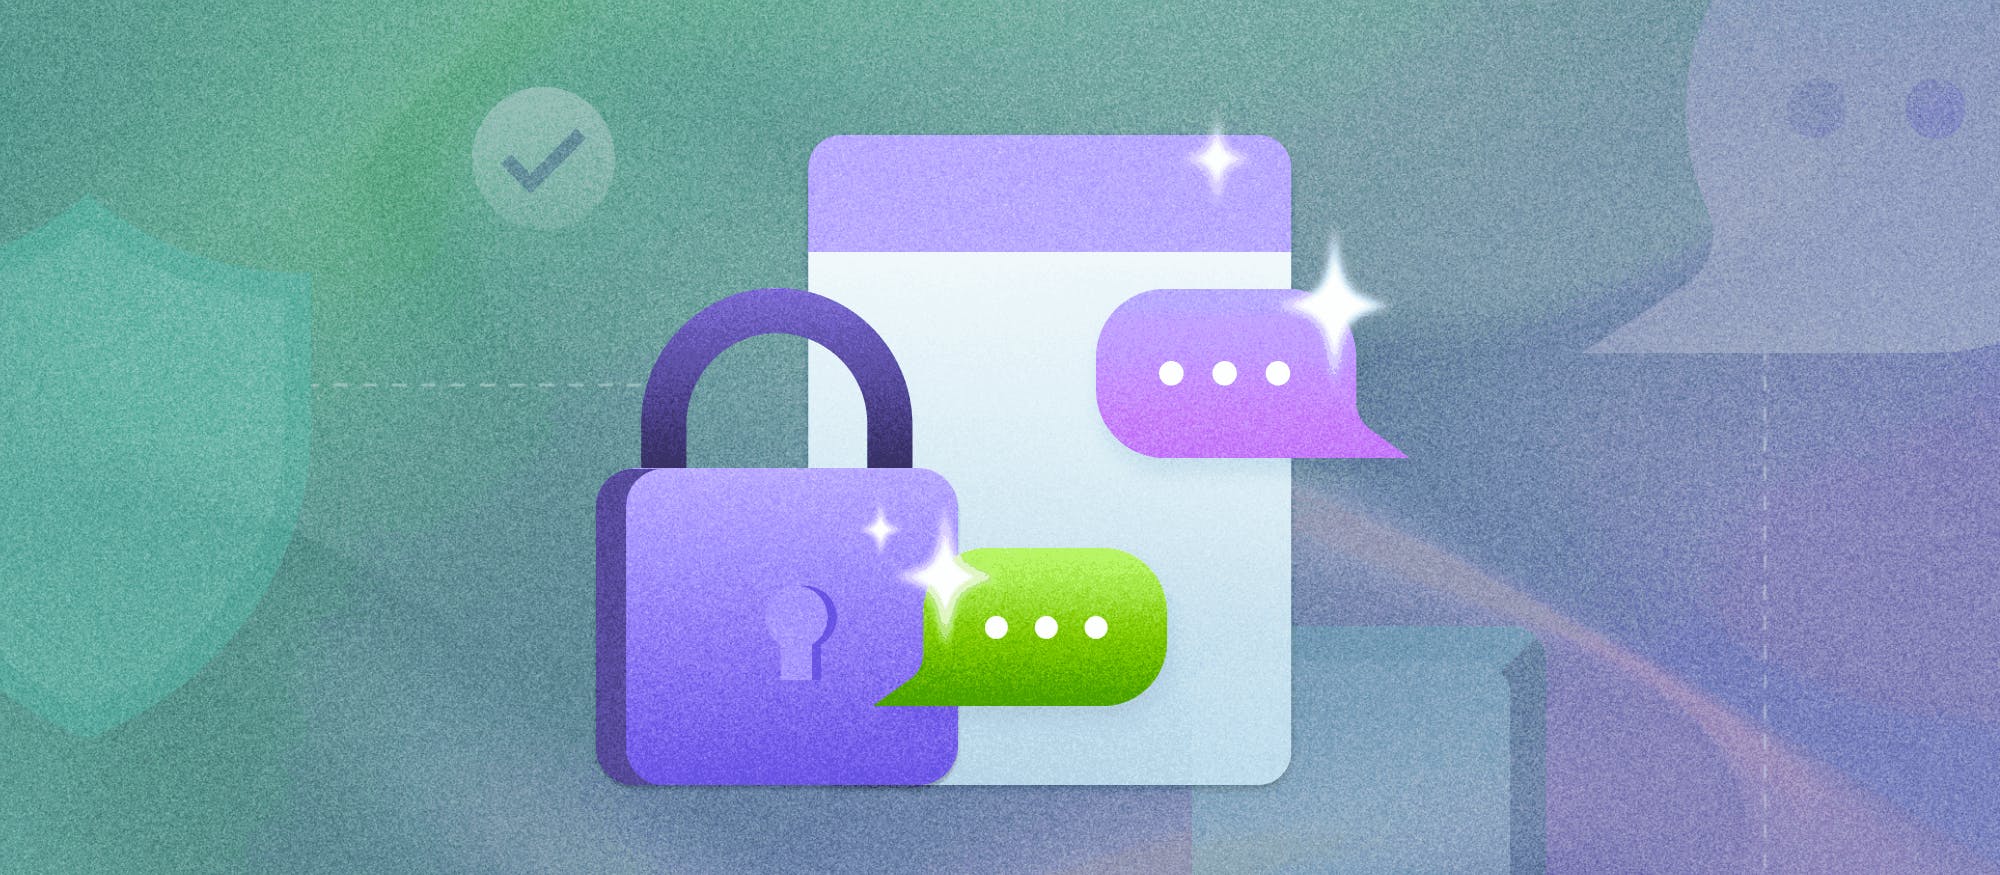 20230125 Secure messaging apps blog cover